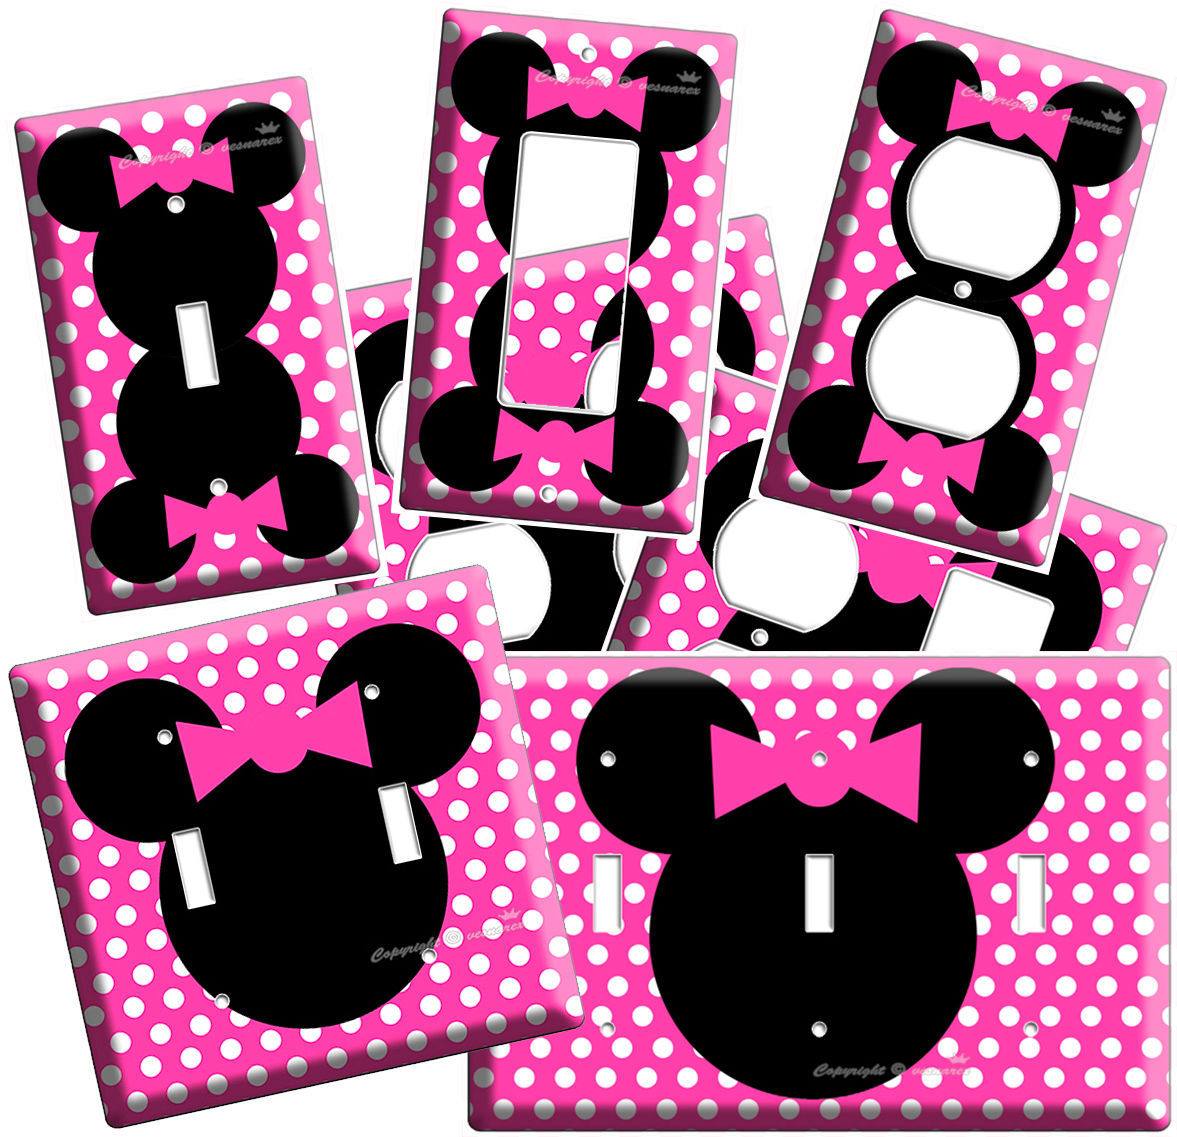 MINNIE MOUSE HEAD PINK POLKA DOTS KIDS GIRLS BEDROOM ROOM LIGHT SWITCH OUTLET